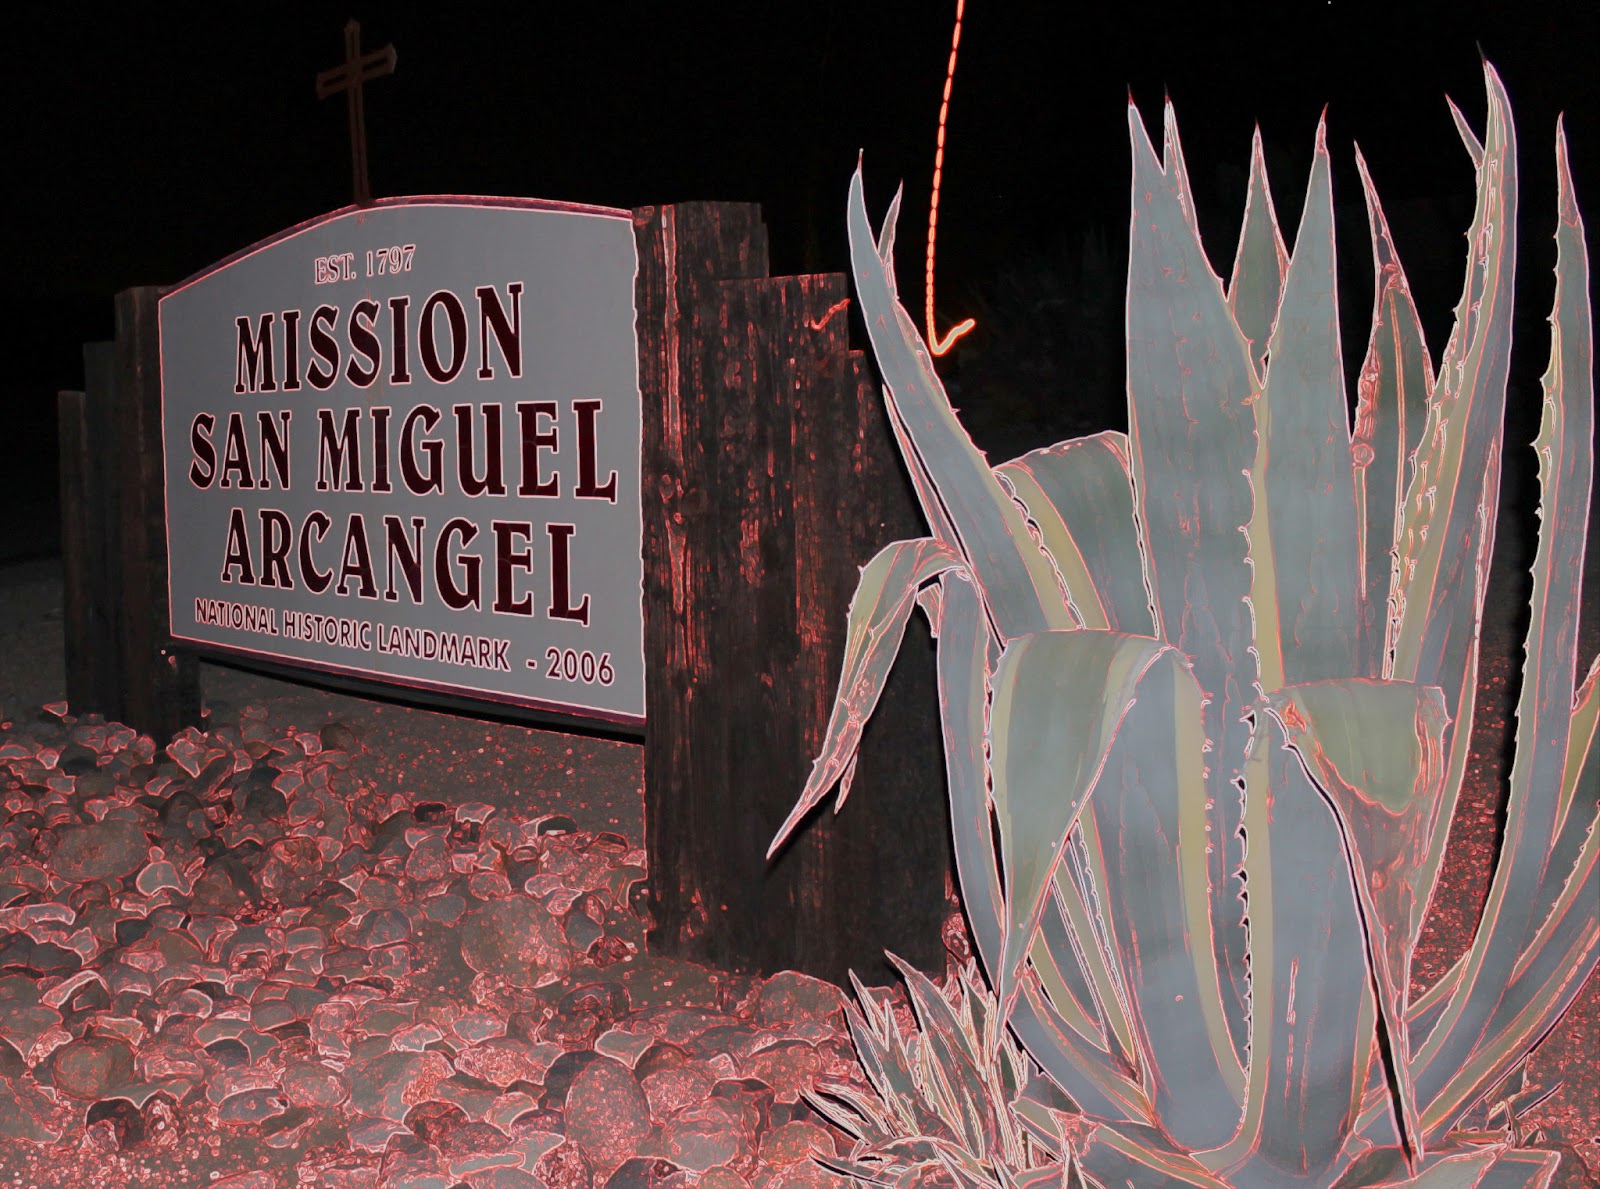 Haunted and Ghostly Mission San Miguel